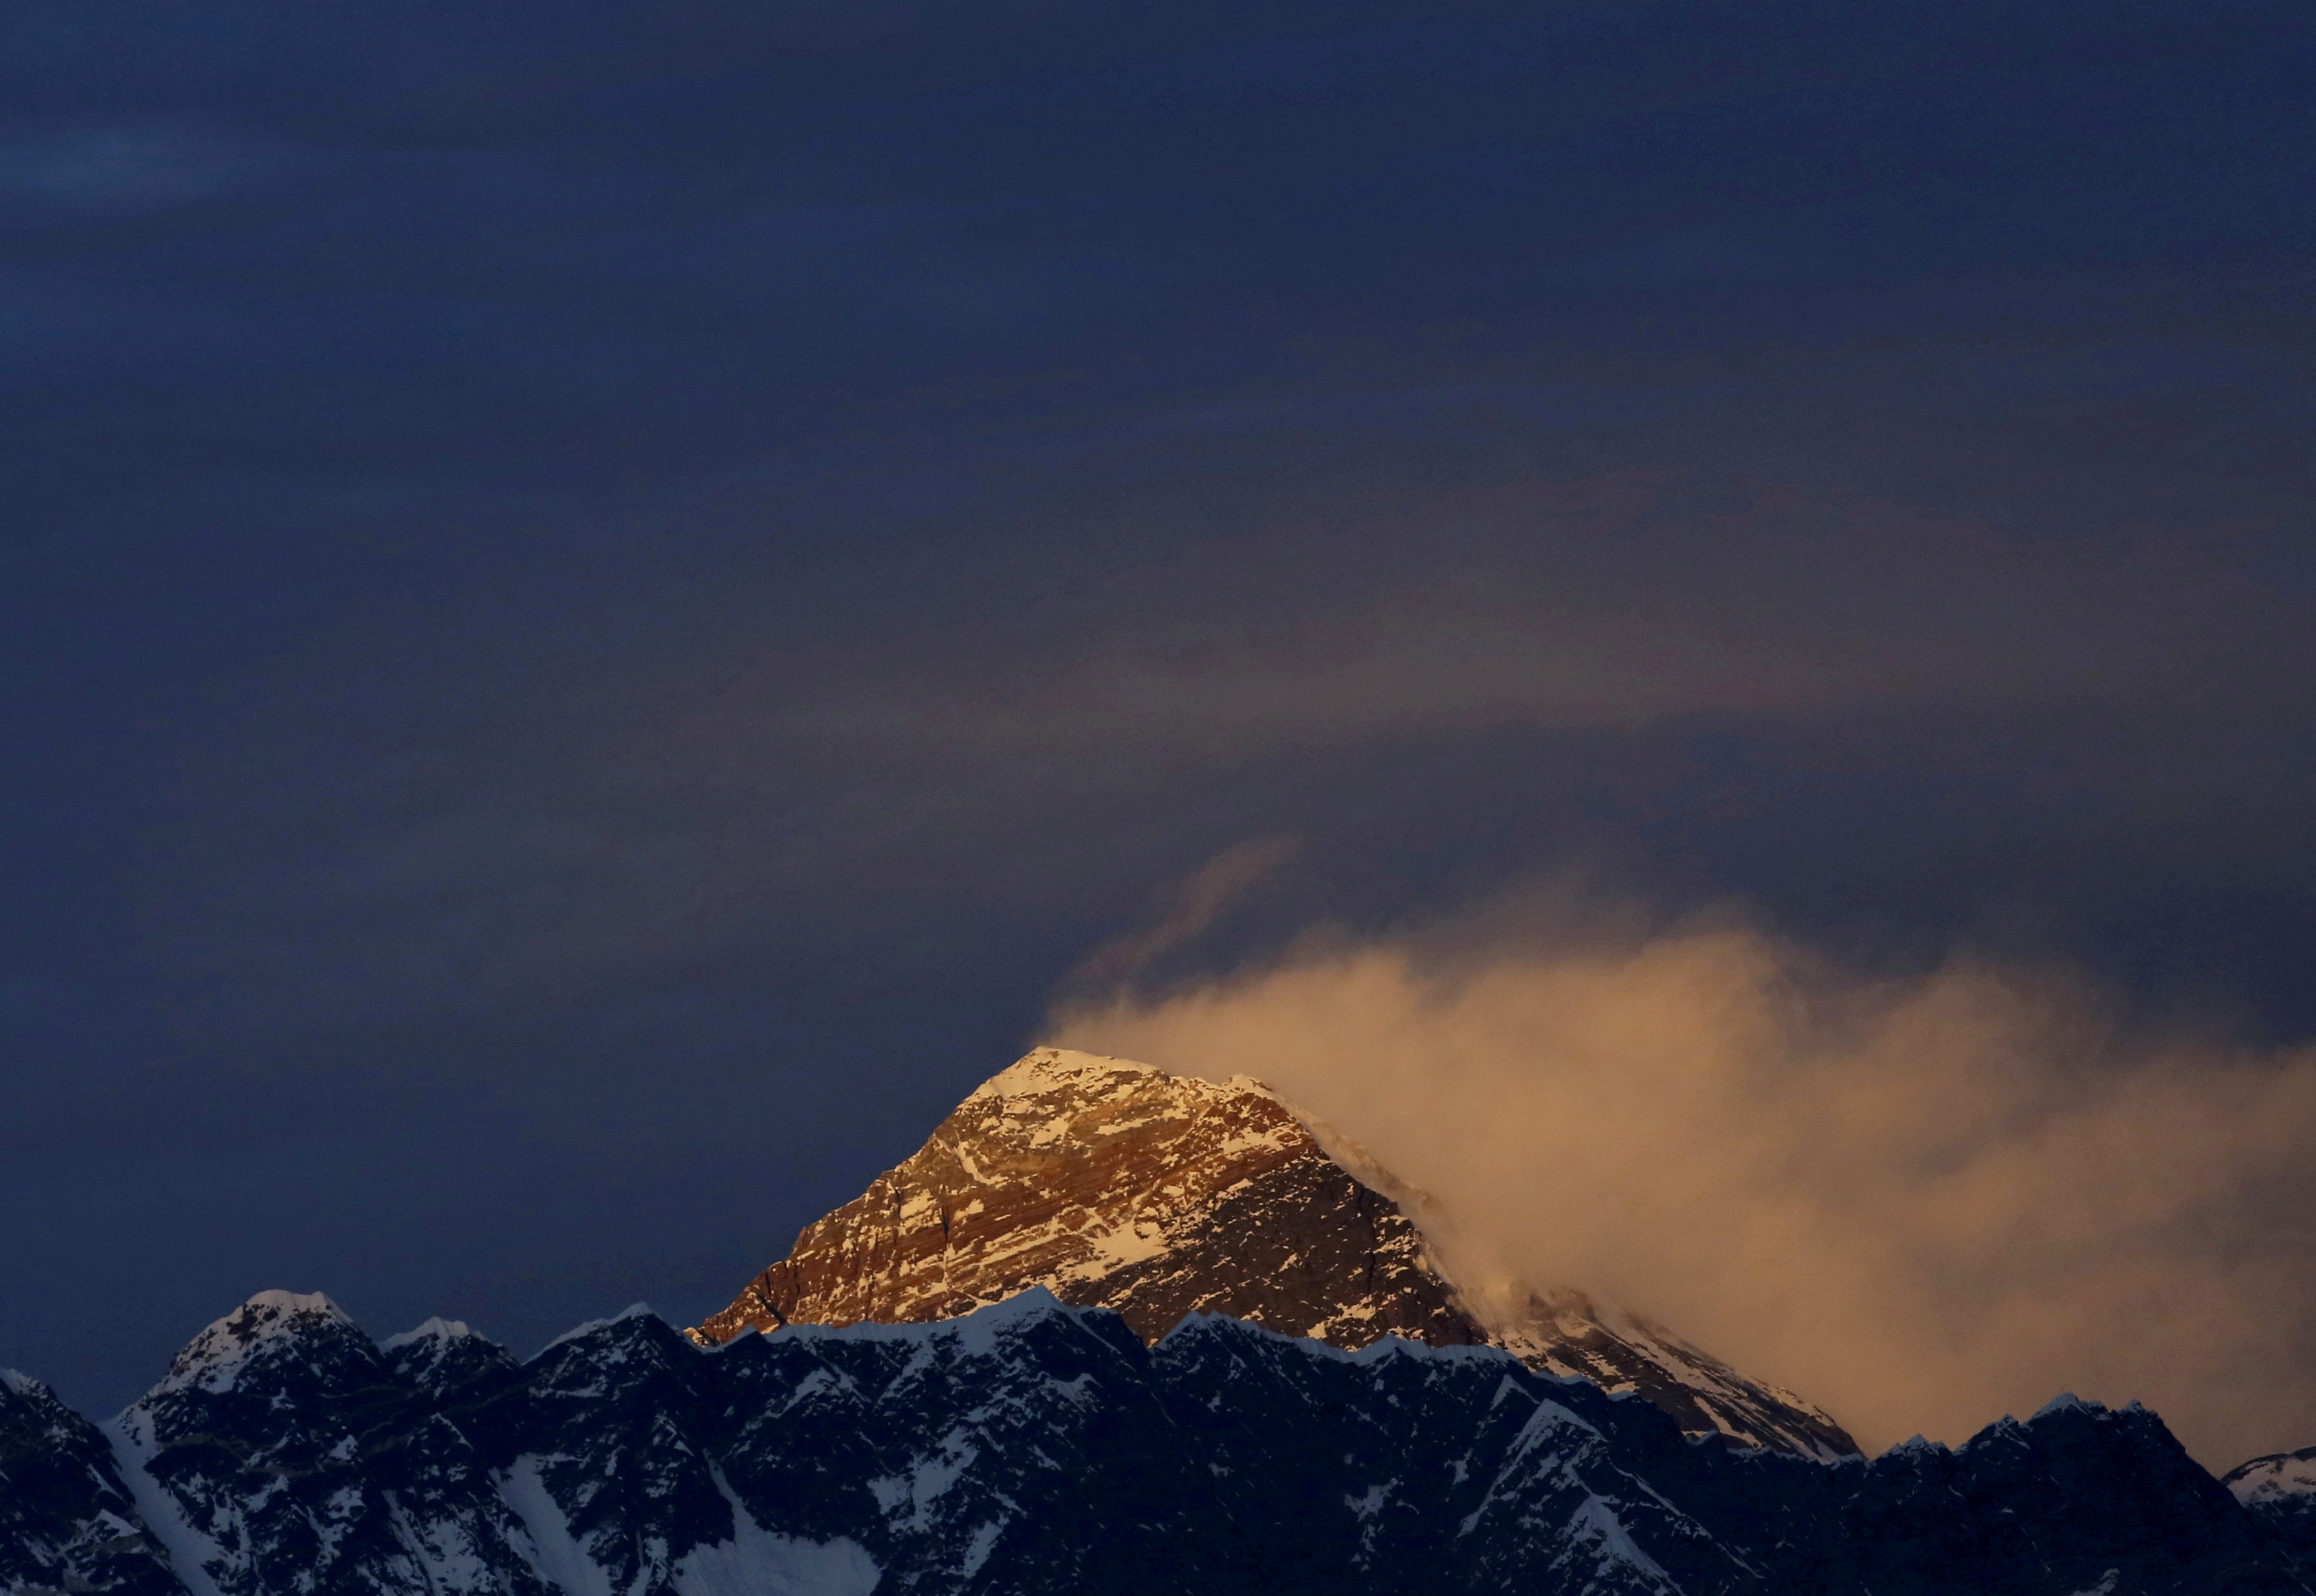 FILE PHOTO: Light illuminates Mount Everest, during sunset in Solukhumbu District also known as the Everest region